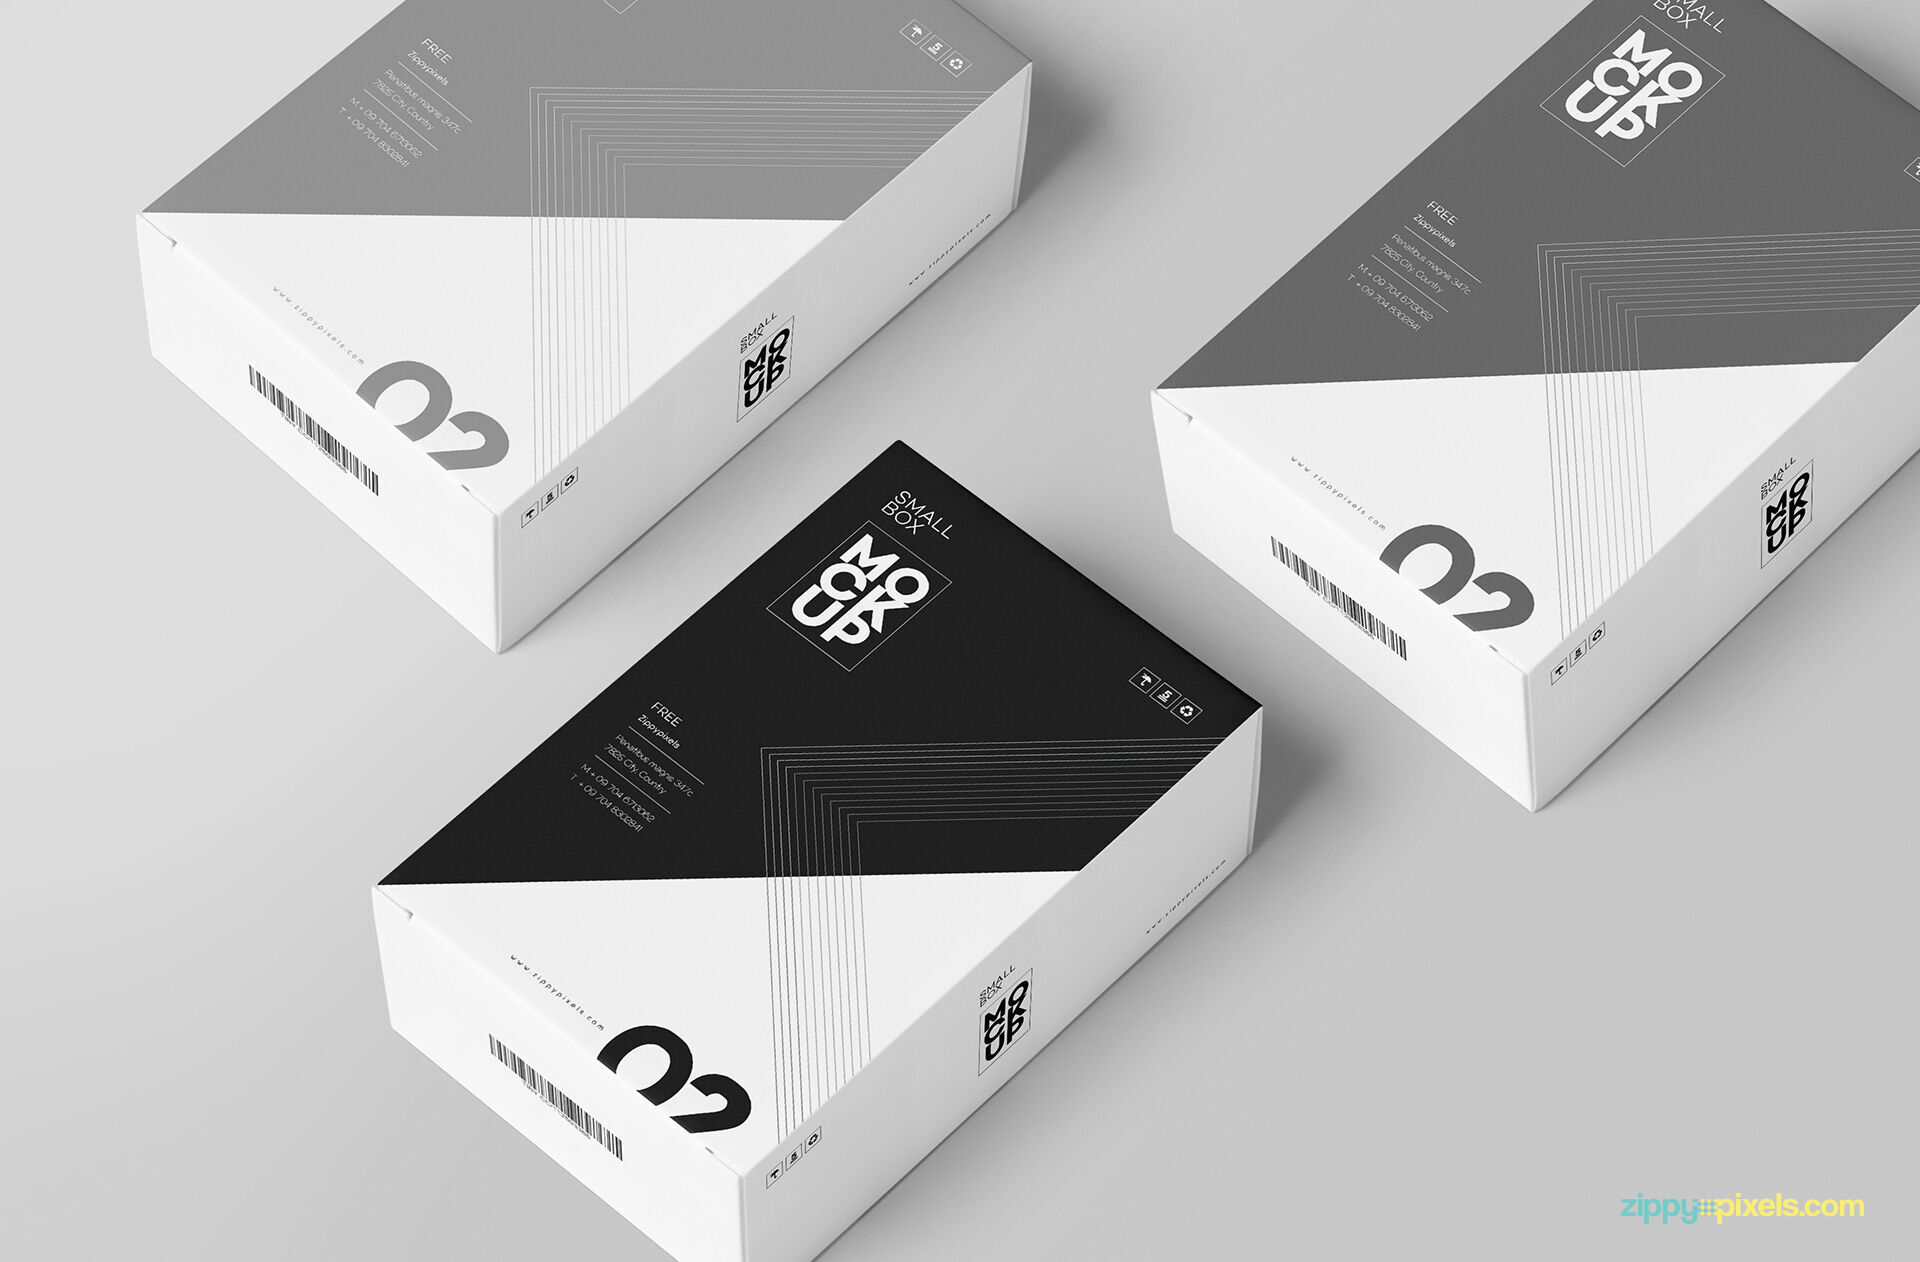 Two Mockups of a Single and Three Perspective Card Boxes FREE PSD